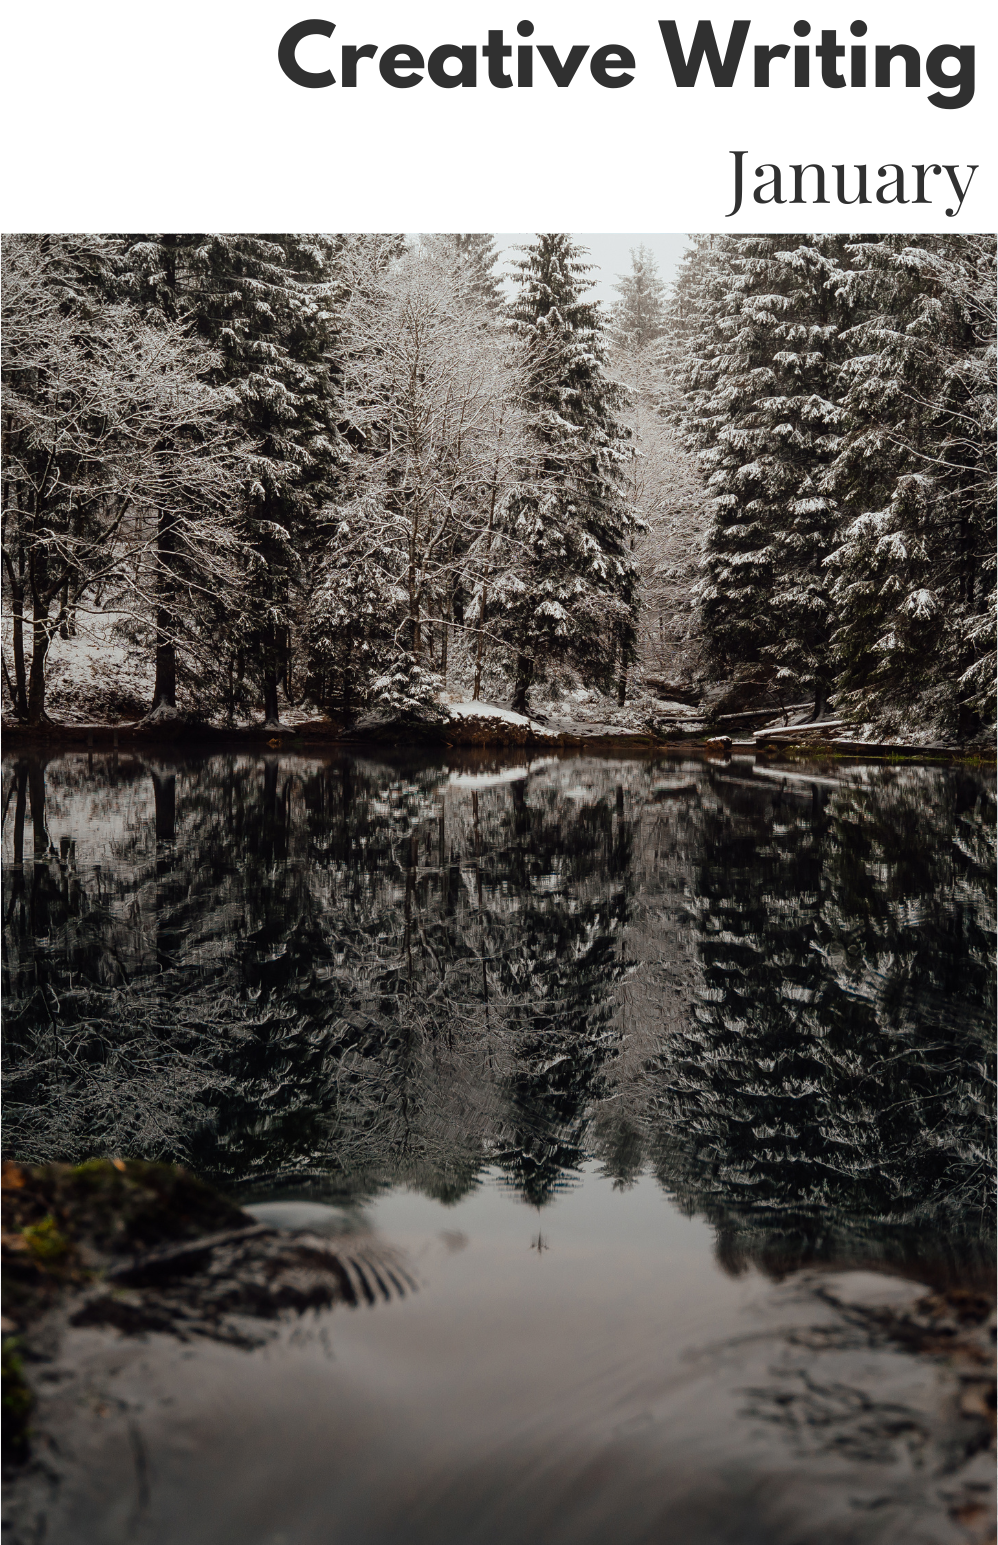 The cover to Creative Writing January, which features a monochromatic photograph of a lake with snowy pine trees surrounding it. The trees are reflected in the lake. 